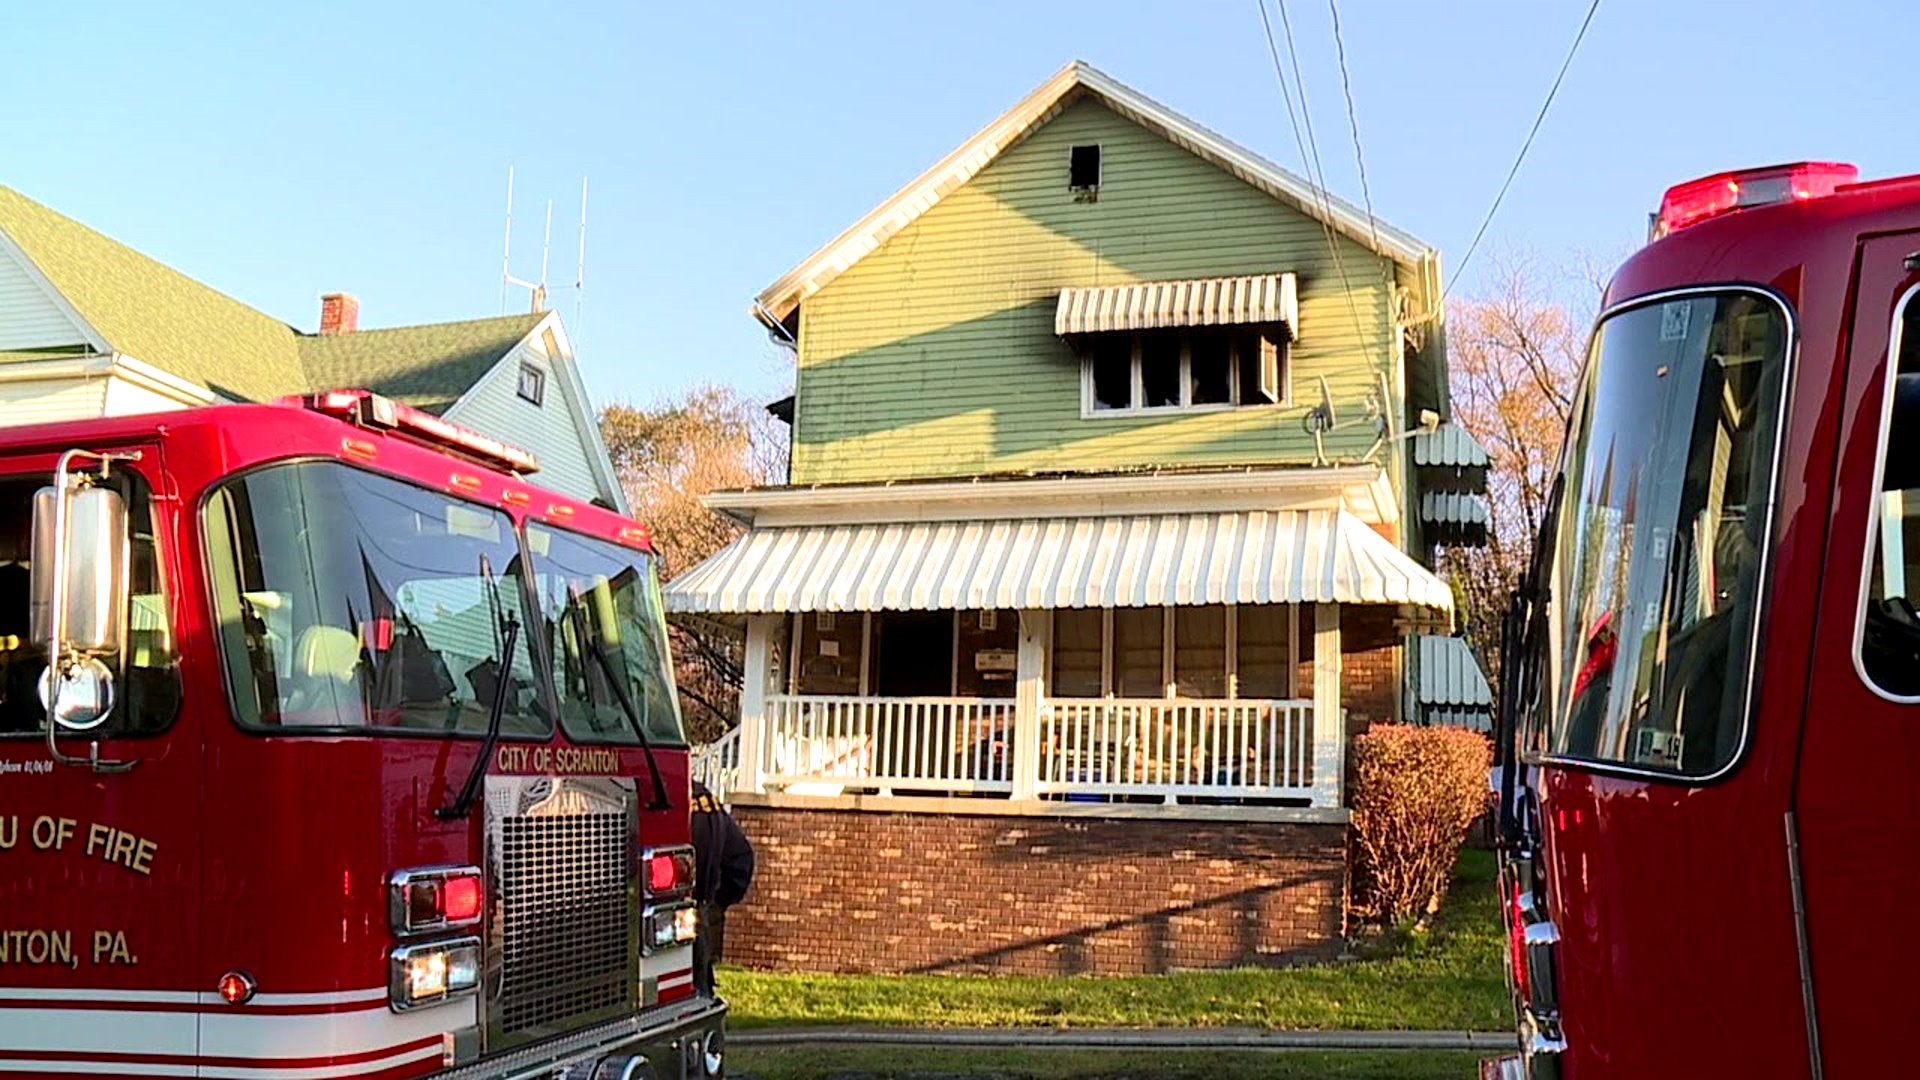 Residents Treated for Smoke Inhalation After Fire in Scranton